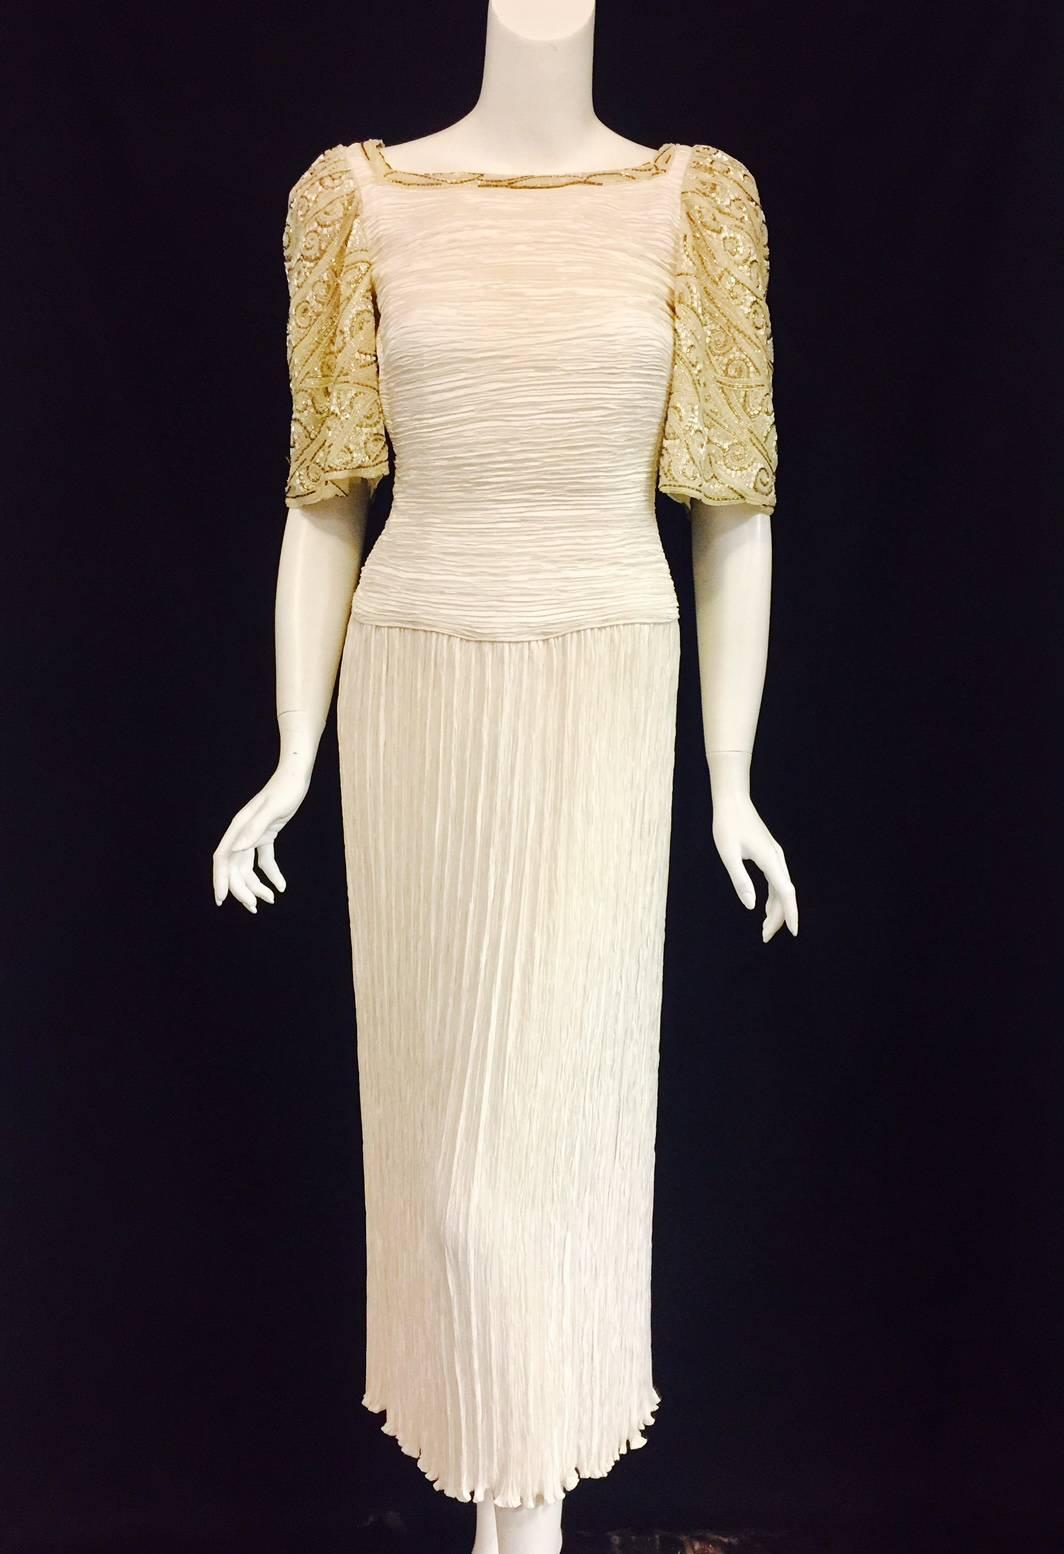 The gown is created in the iconic and instantly recognizable Mary McFadden Marii pleating. The neckline and short bell sleeves are embellished with beige, gold, white and Ivory beads. This gown is quintessential McFadden, who was inspired by ancient